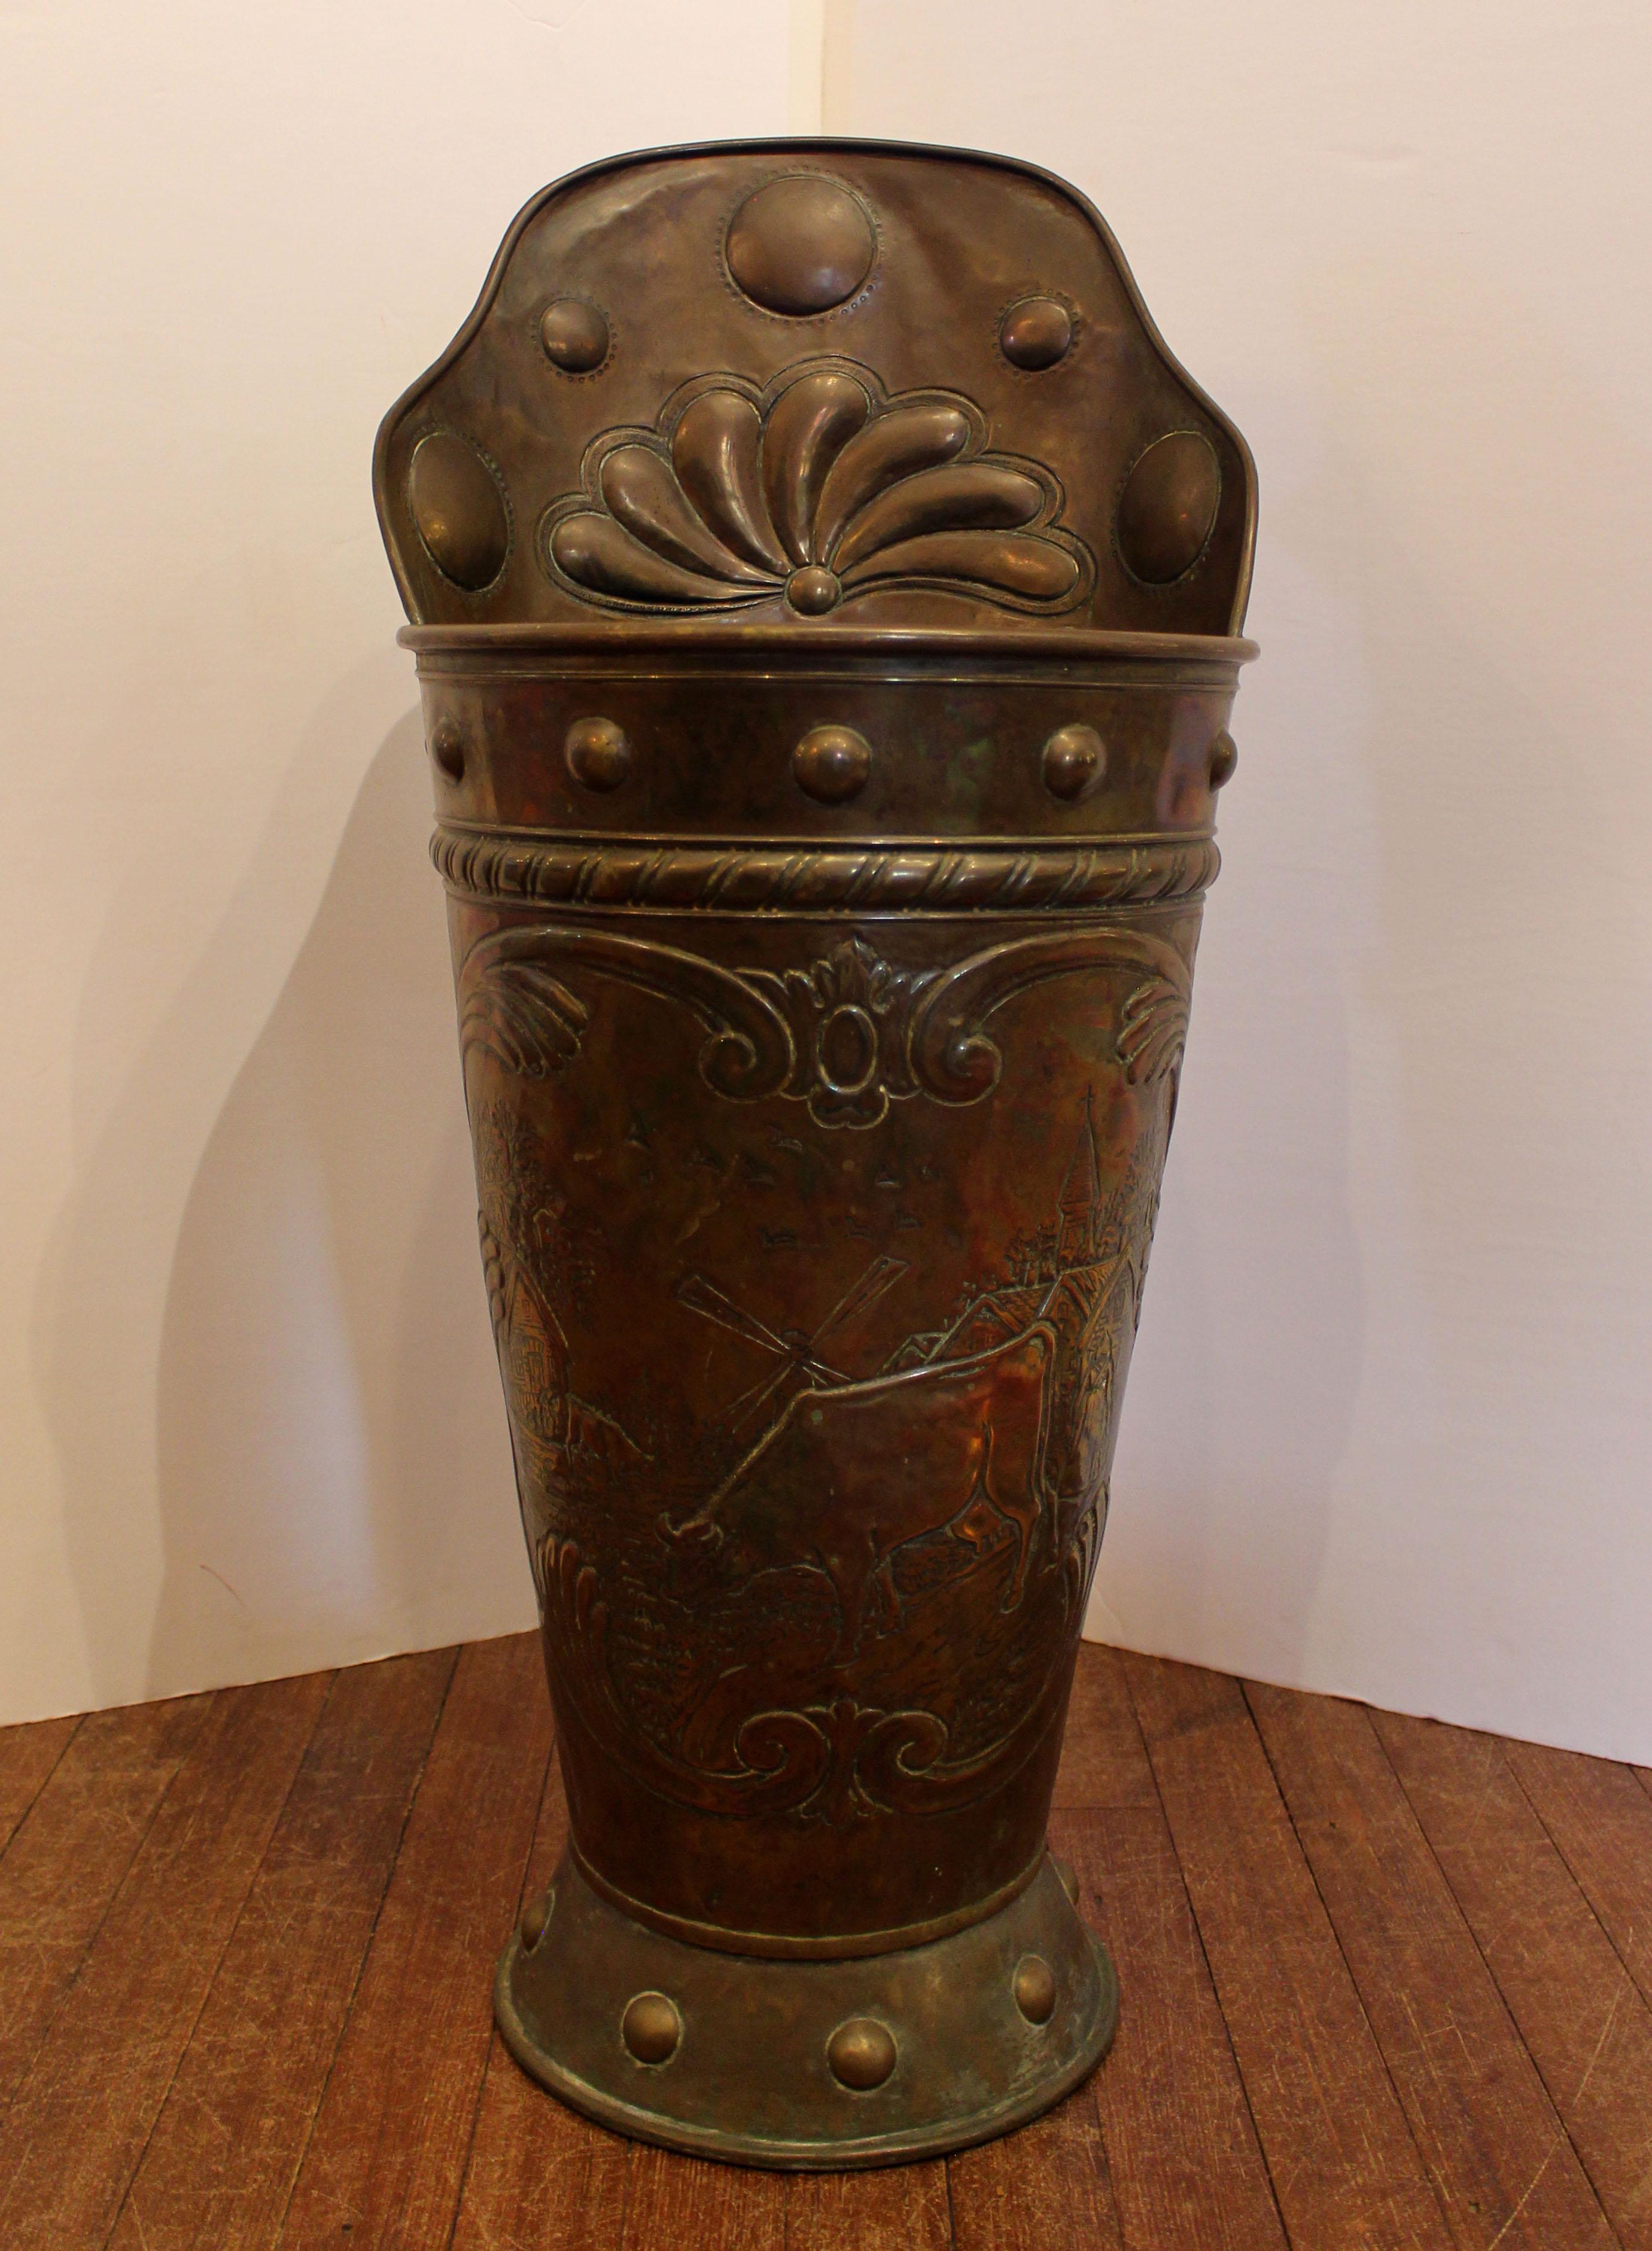 Mid-19th century copper grape hod, French. Decorated with large bosses, gadrooned fan c-scrolls, and rural village scene with a cow & windmill in the background. Ideal as a stick & umbrella stand, for kindling by the fire, etc. The back with crusty